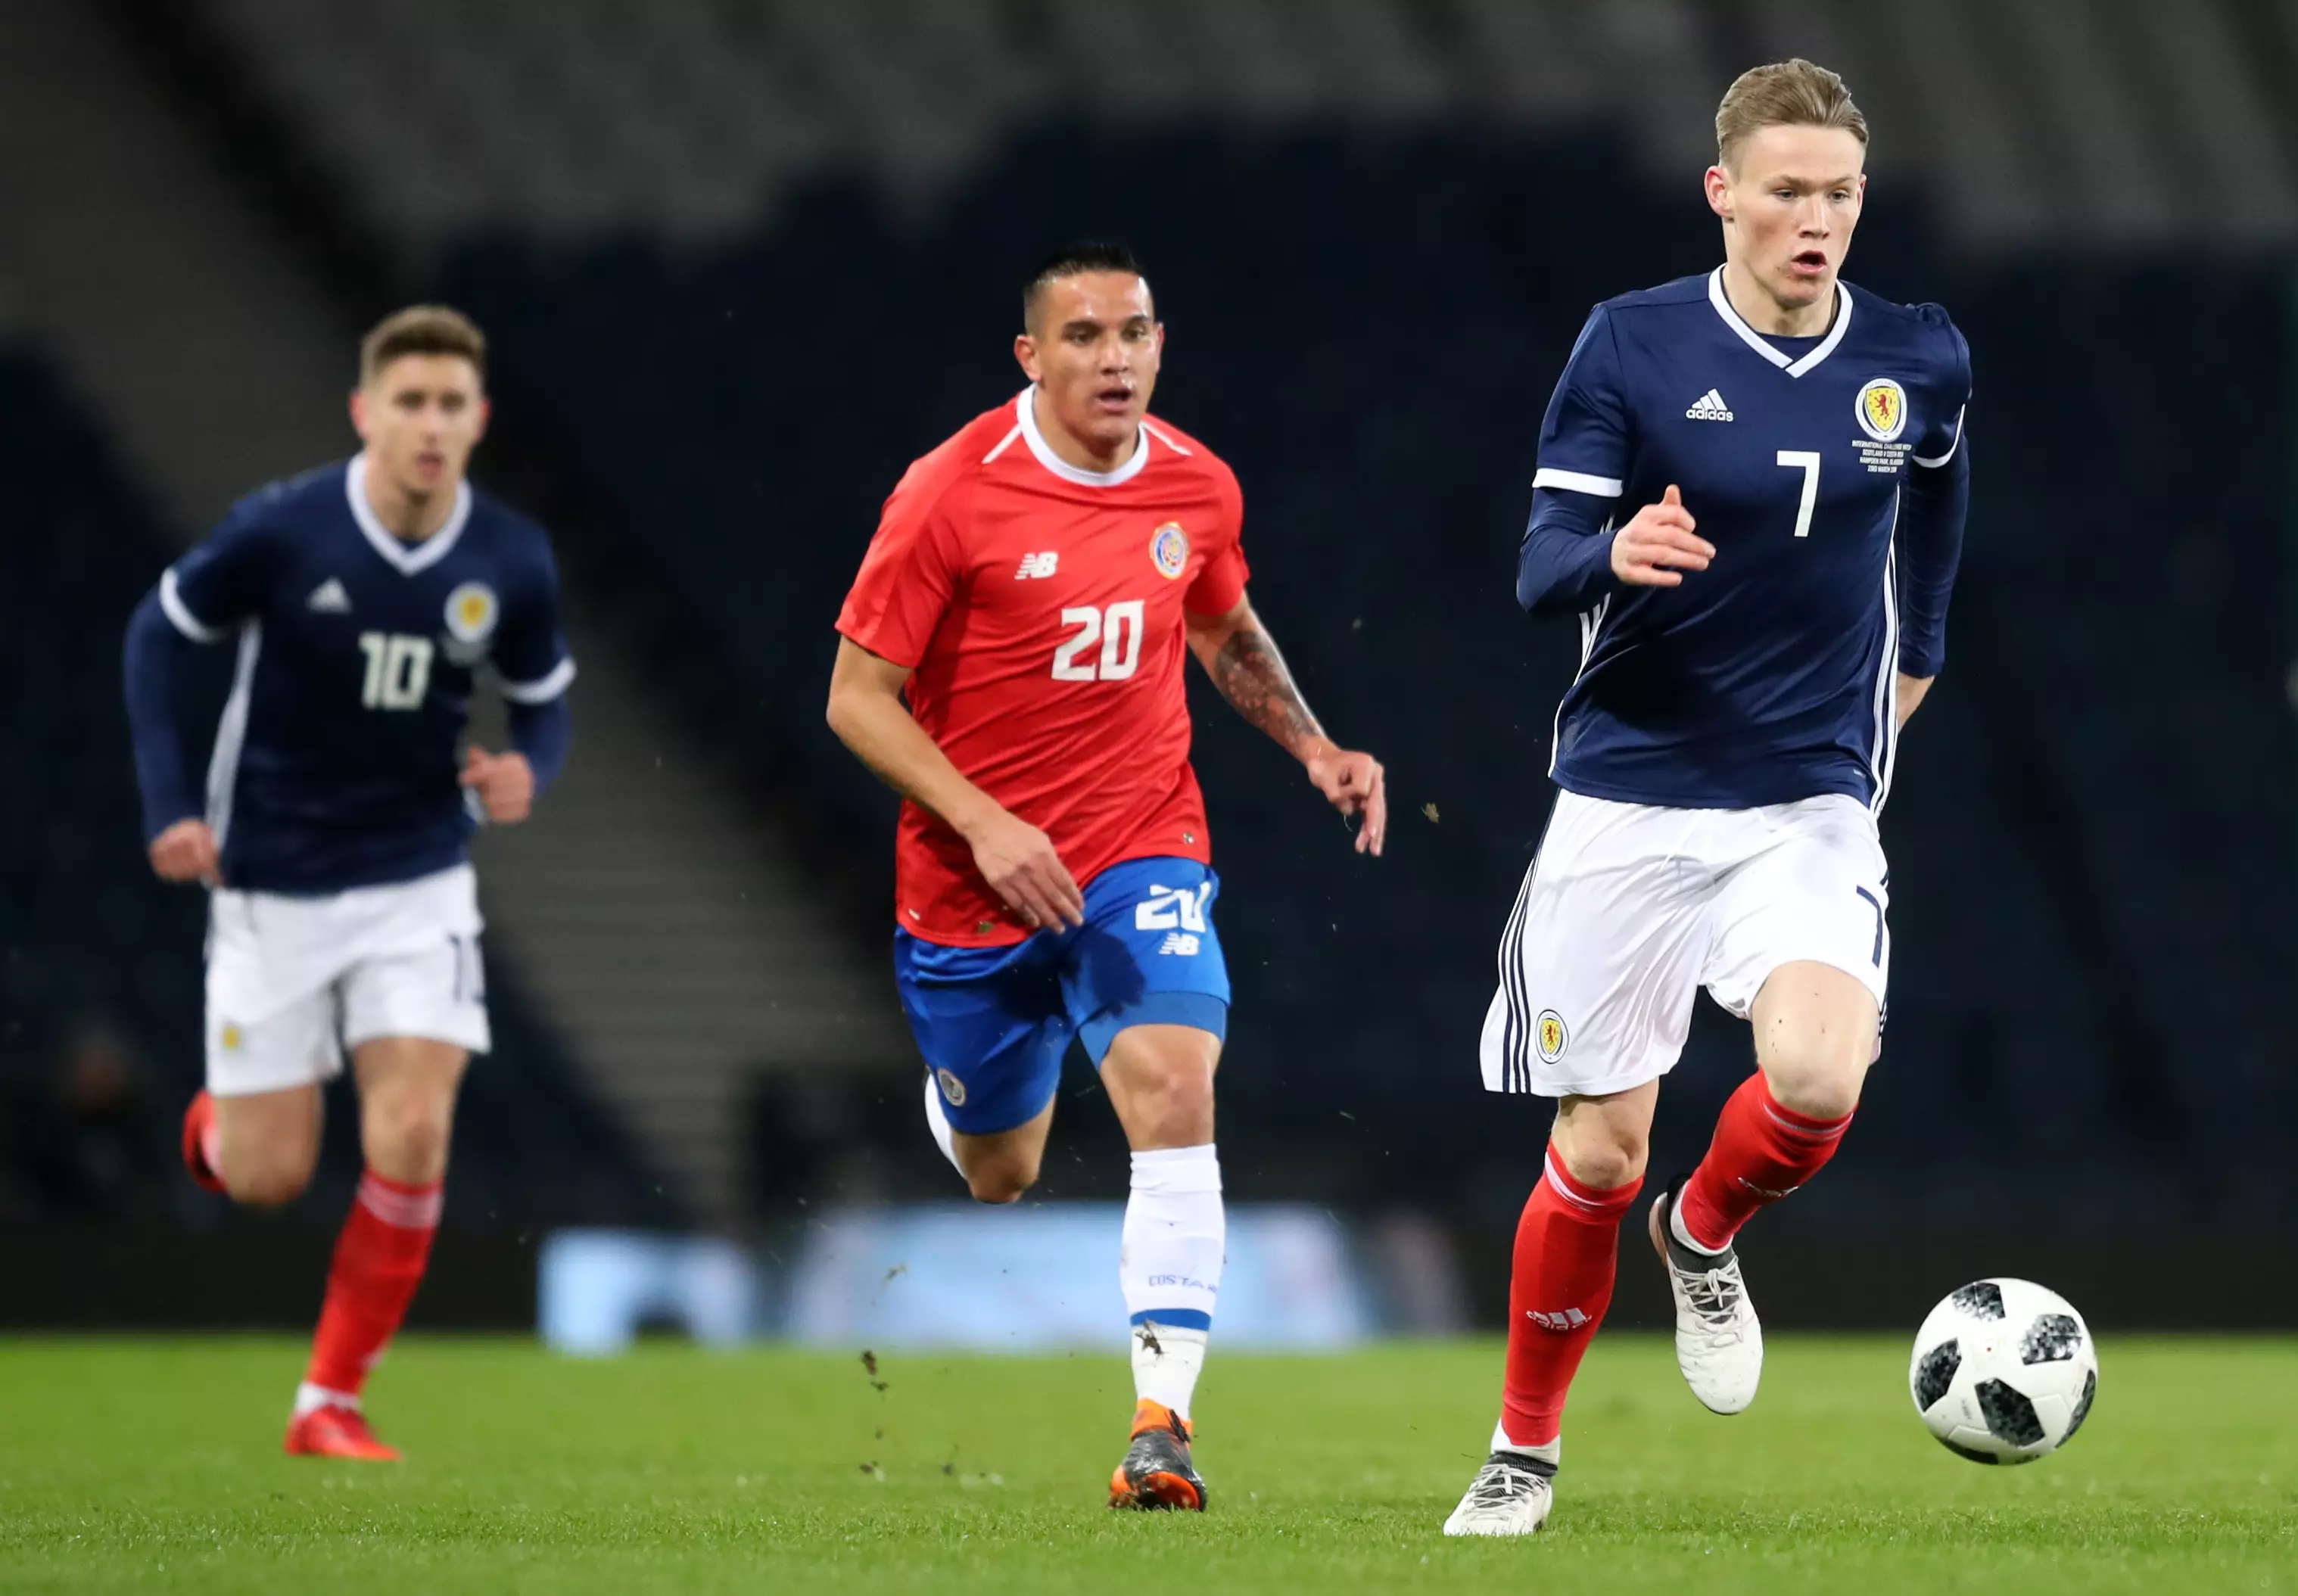 McTominay's performances saw him get a debut for Scotland. Image: PA Images